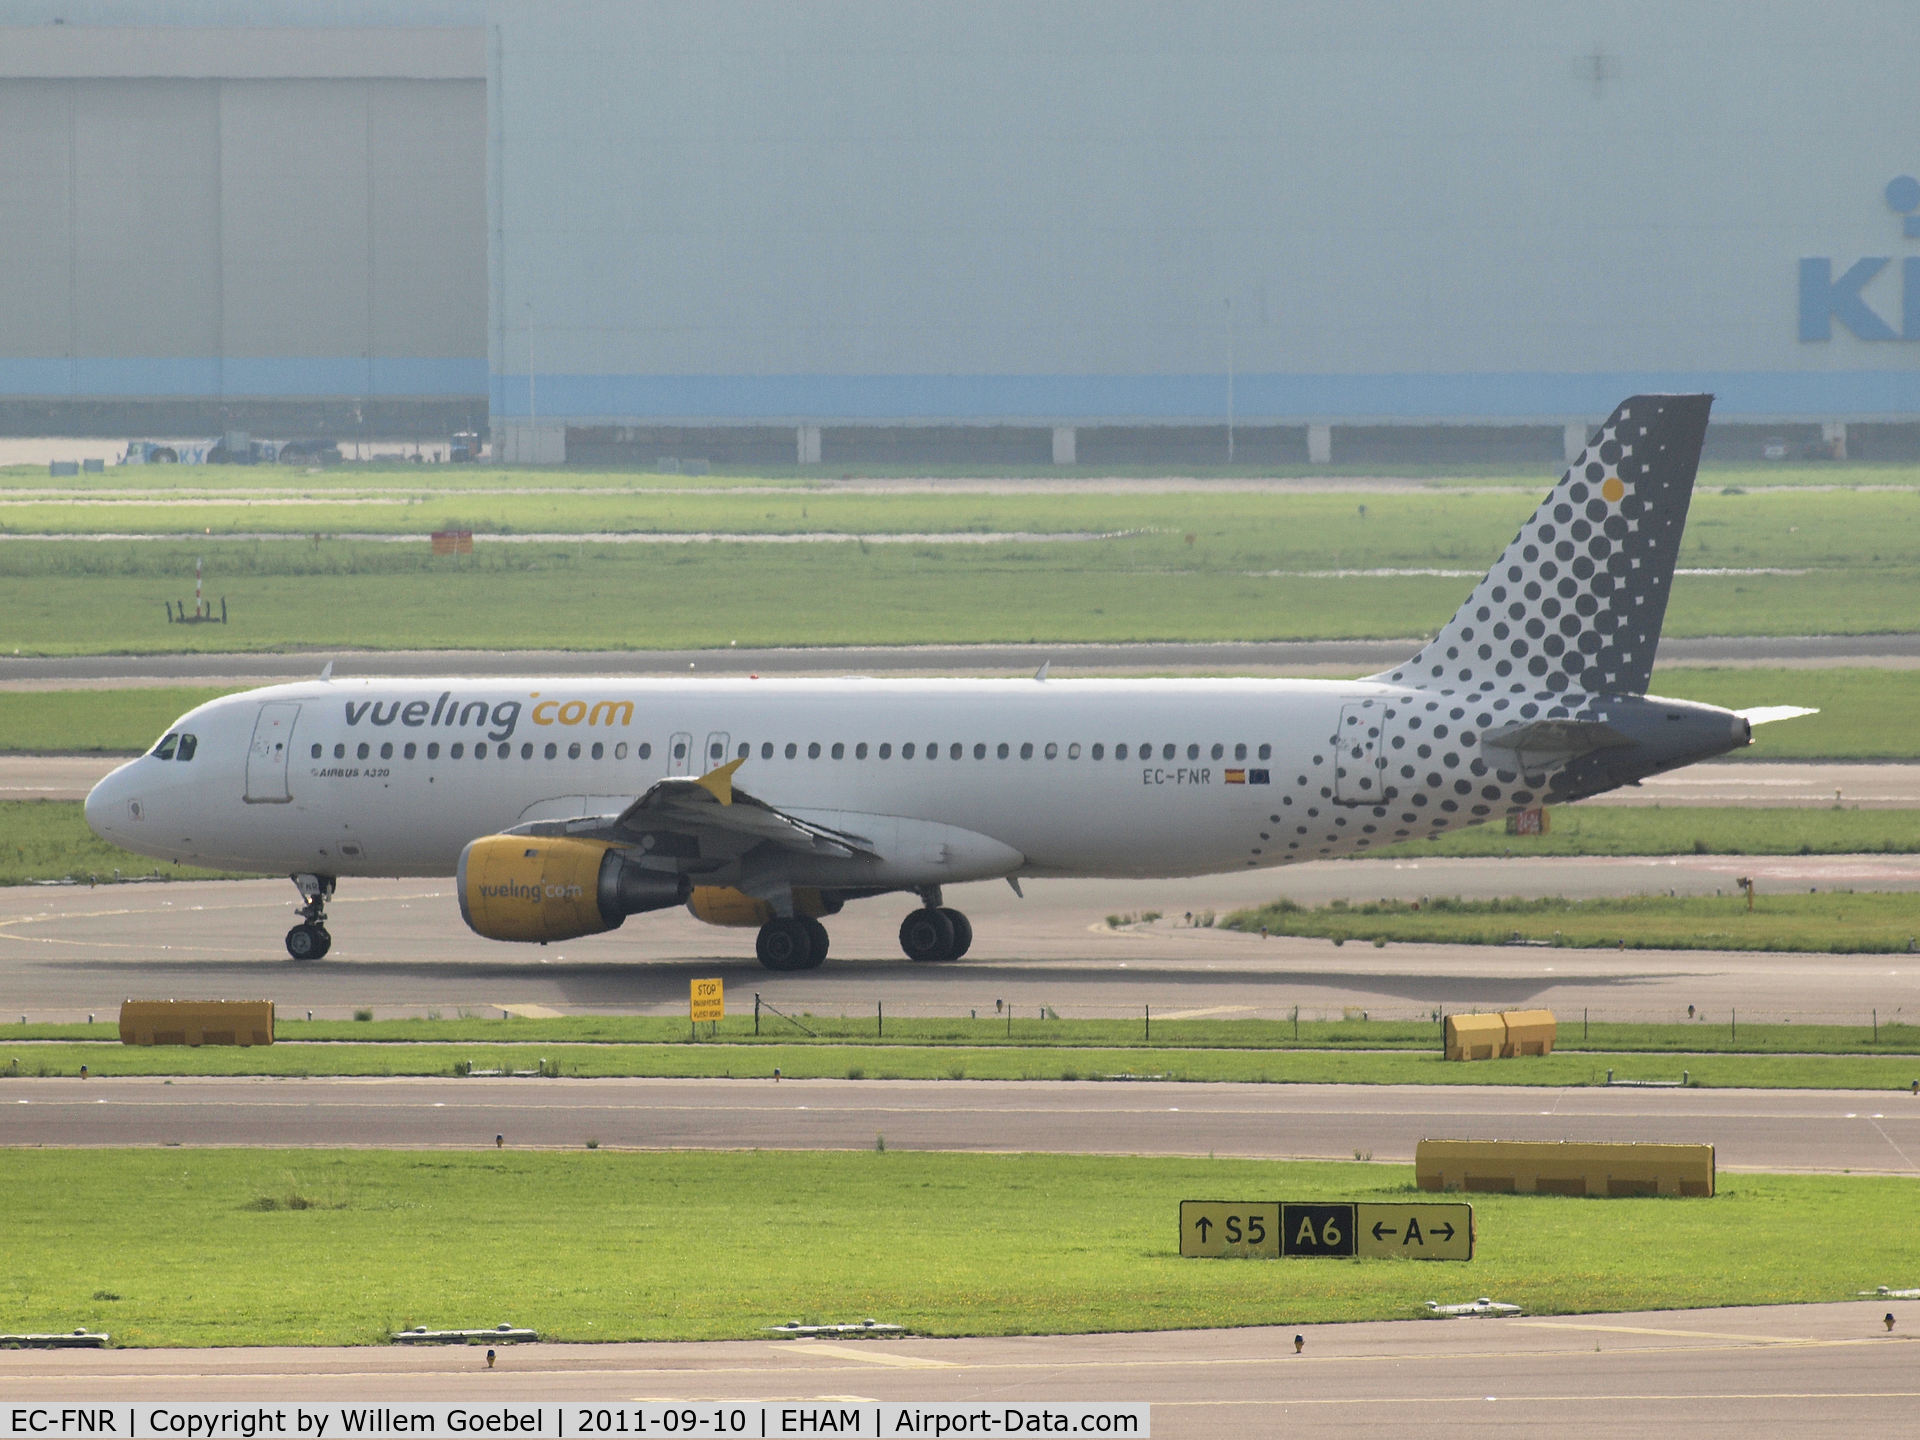 EC-FNR, 1992 Airbus A320-211 C/N 323, Taxi to the runway of 